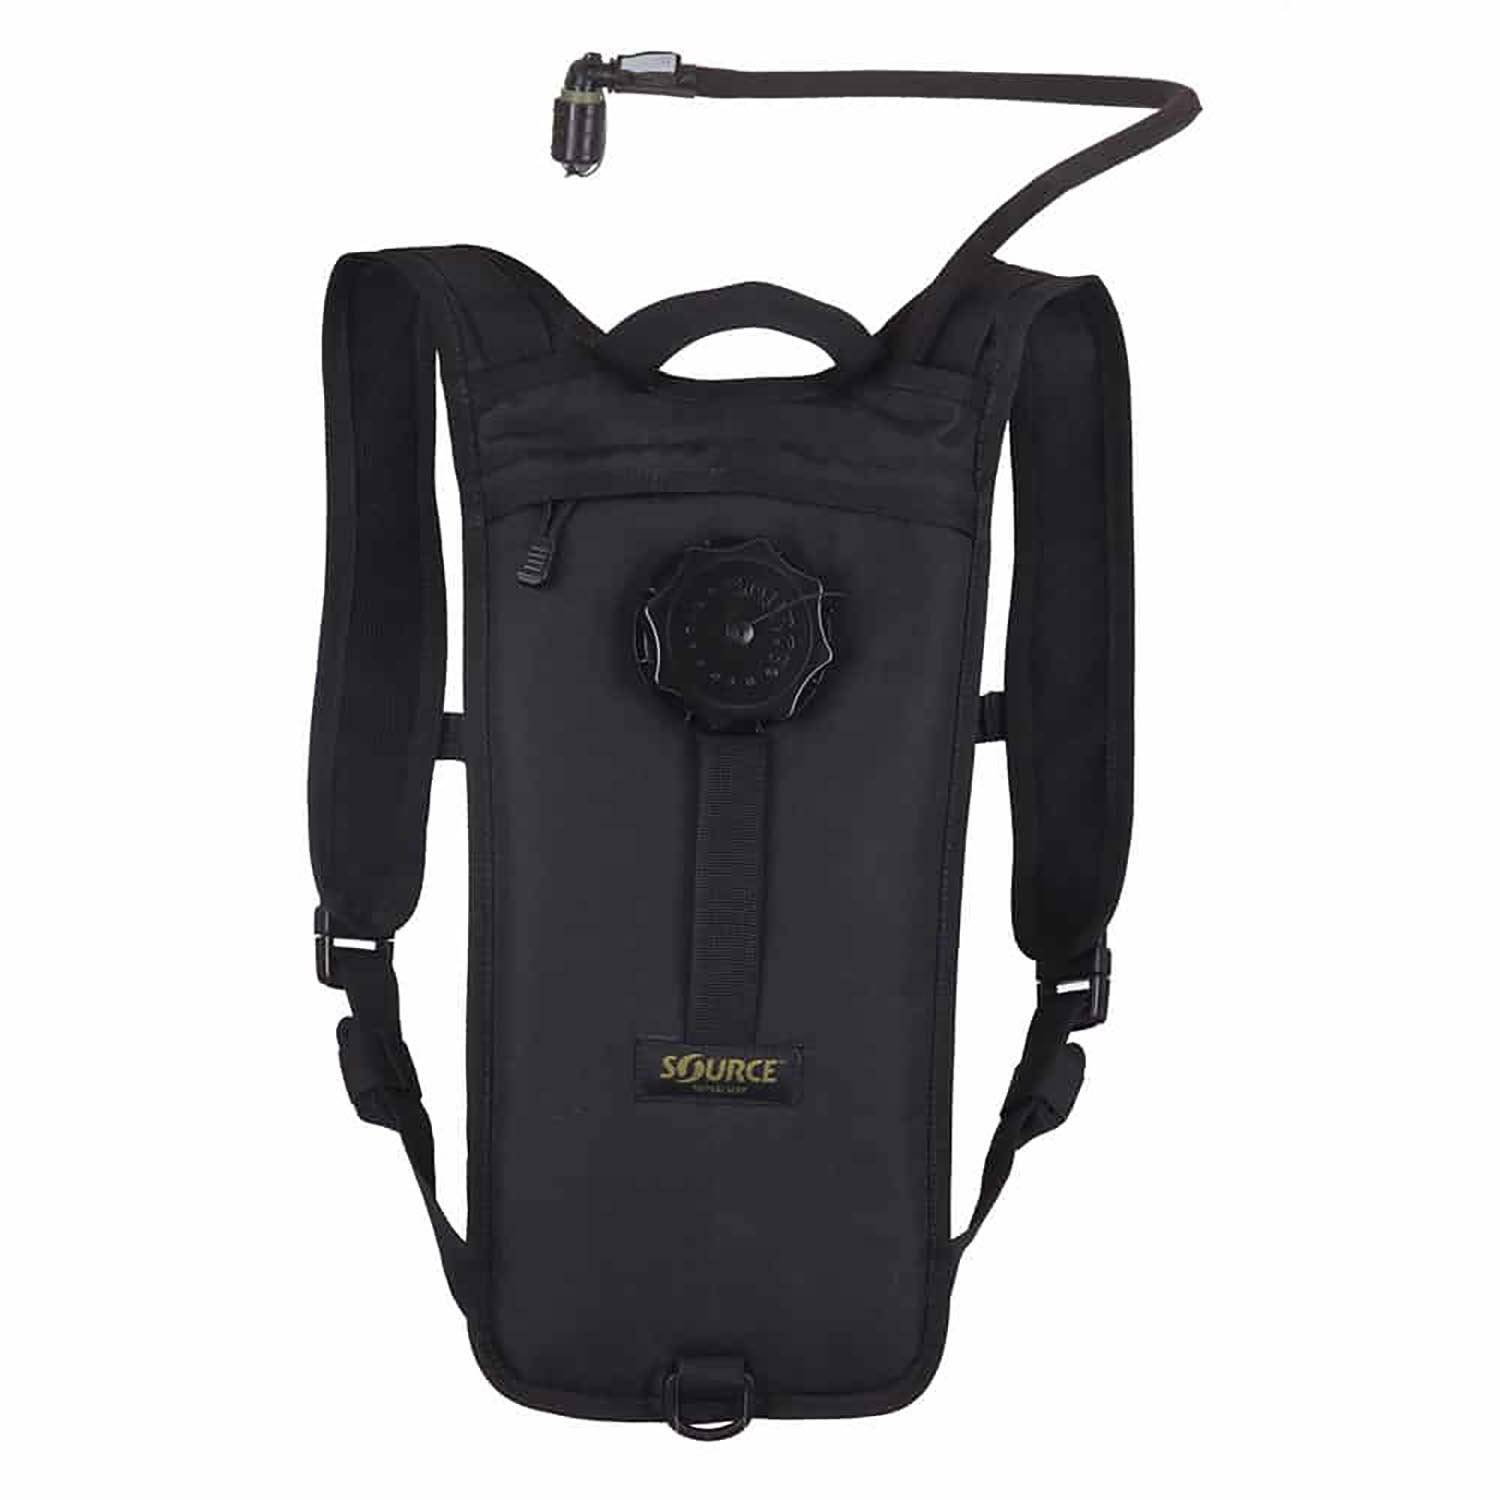 Source Tactical Transporter 2L Hydration Pack